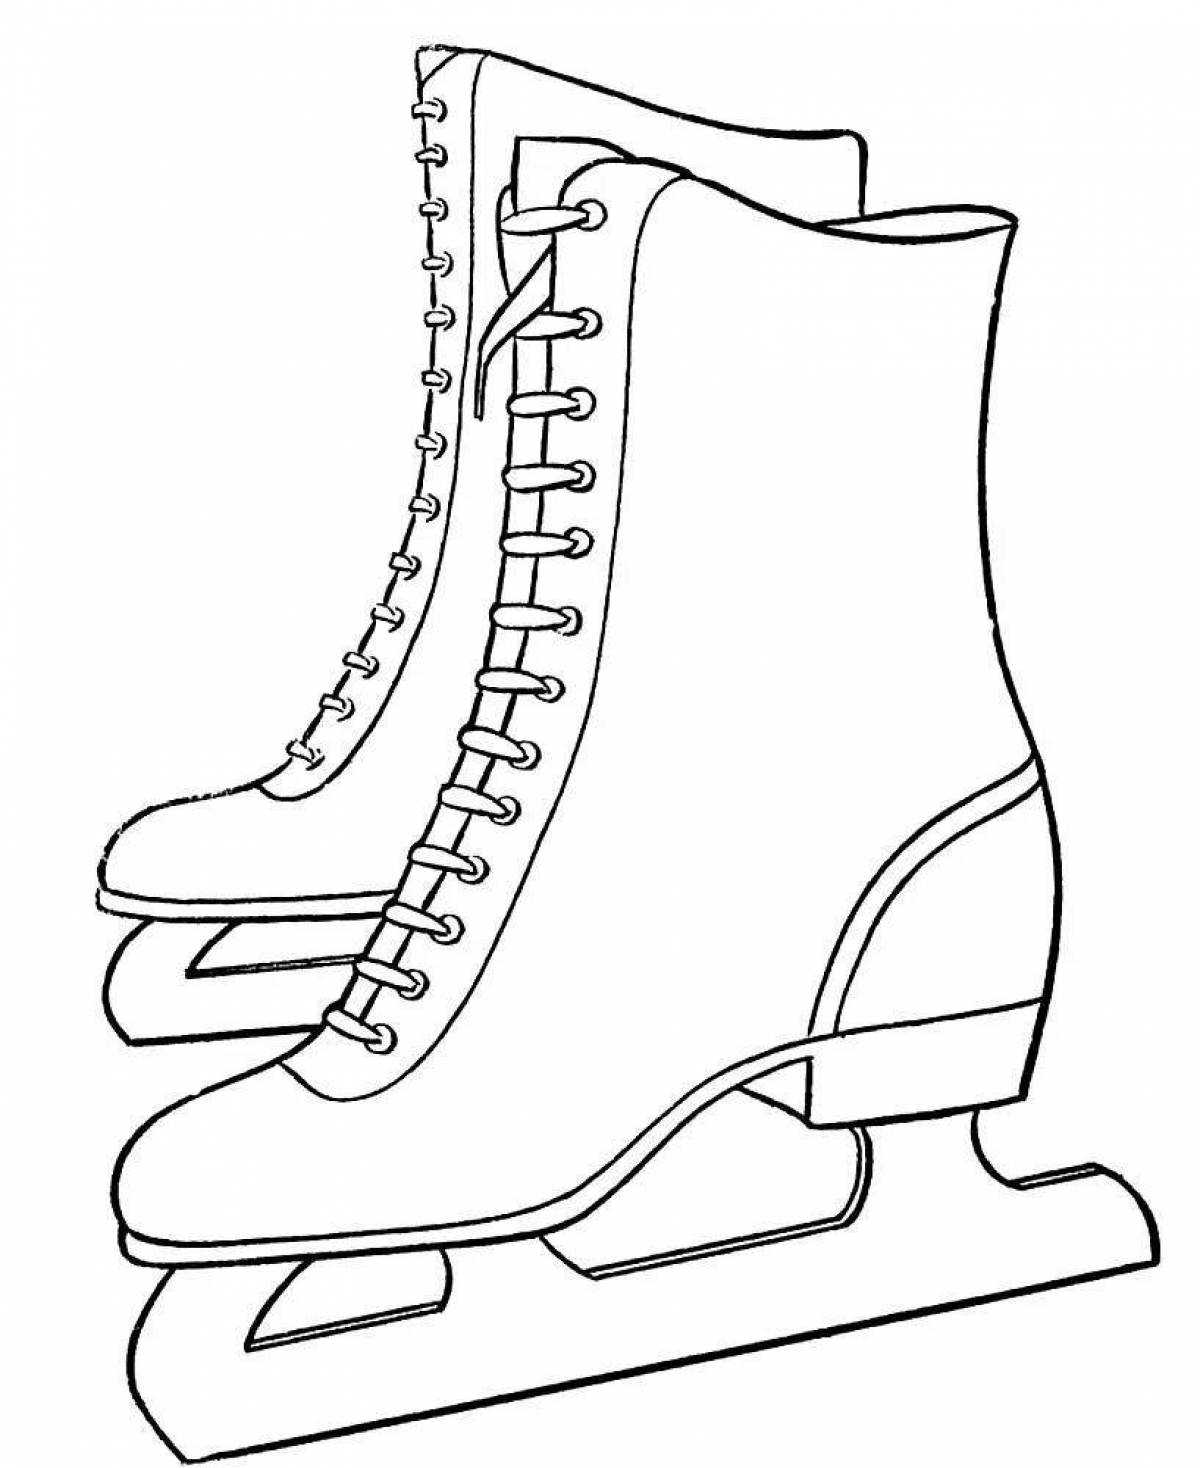 Amazing figure skates coloring page